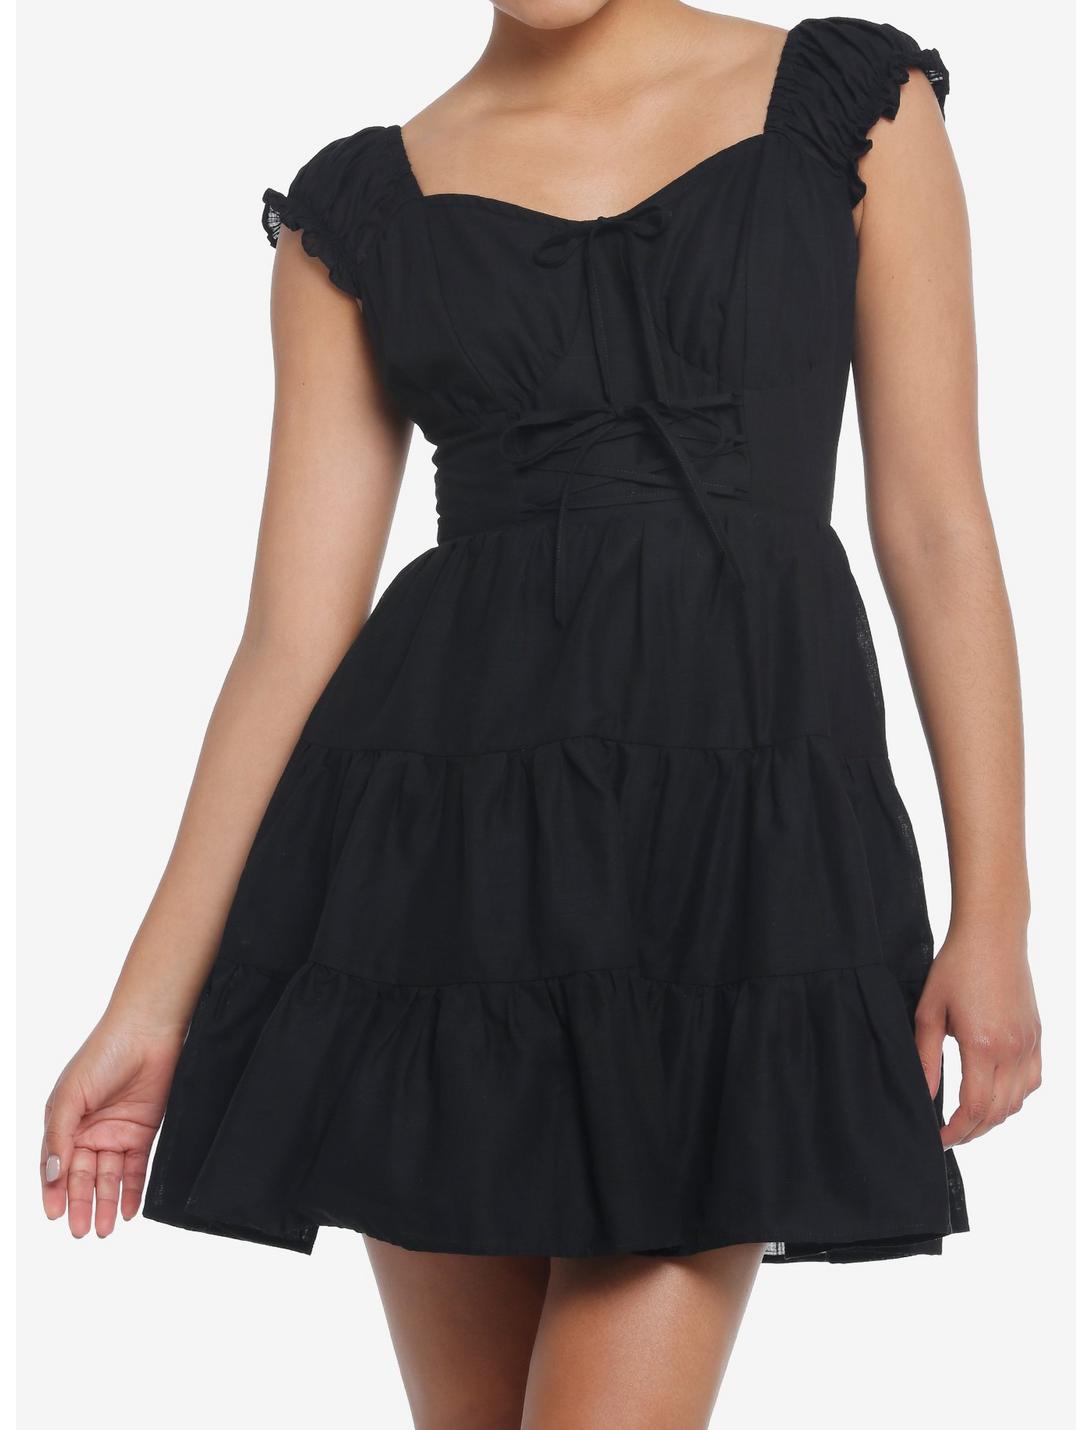 Thorn & Fable Black Tiered Dress, BLACK, hi-res